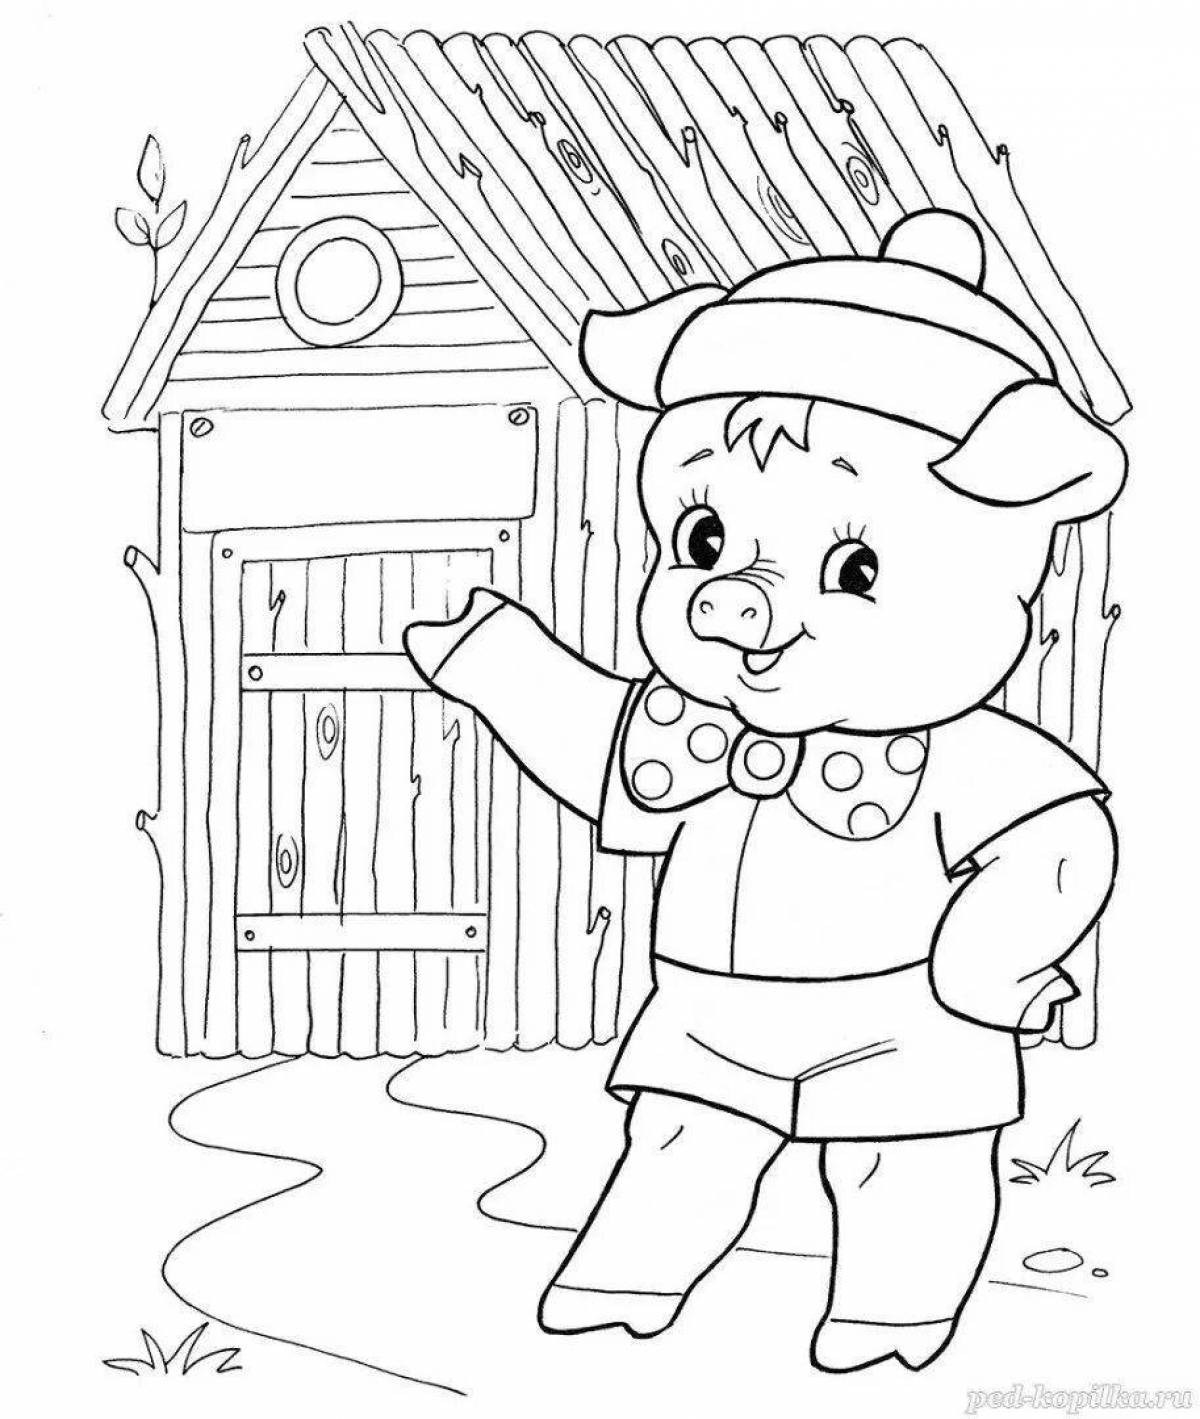 Colorful three little pig coloring page